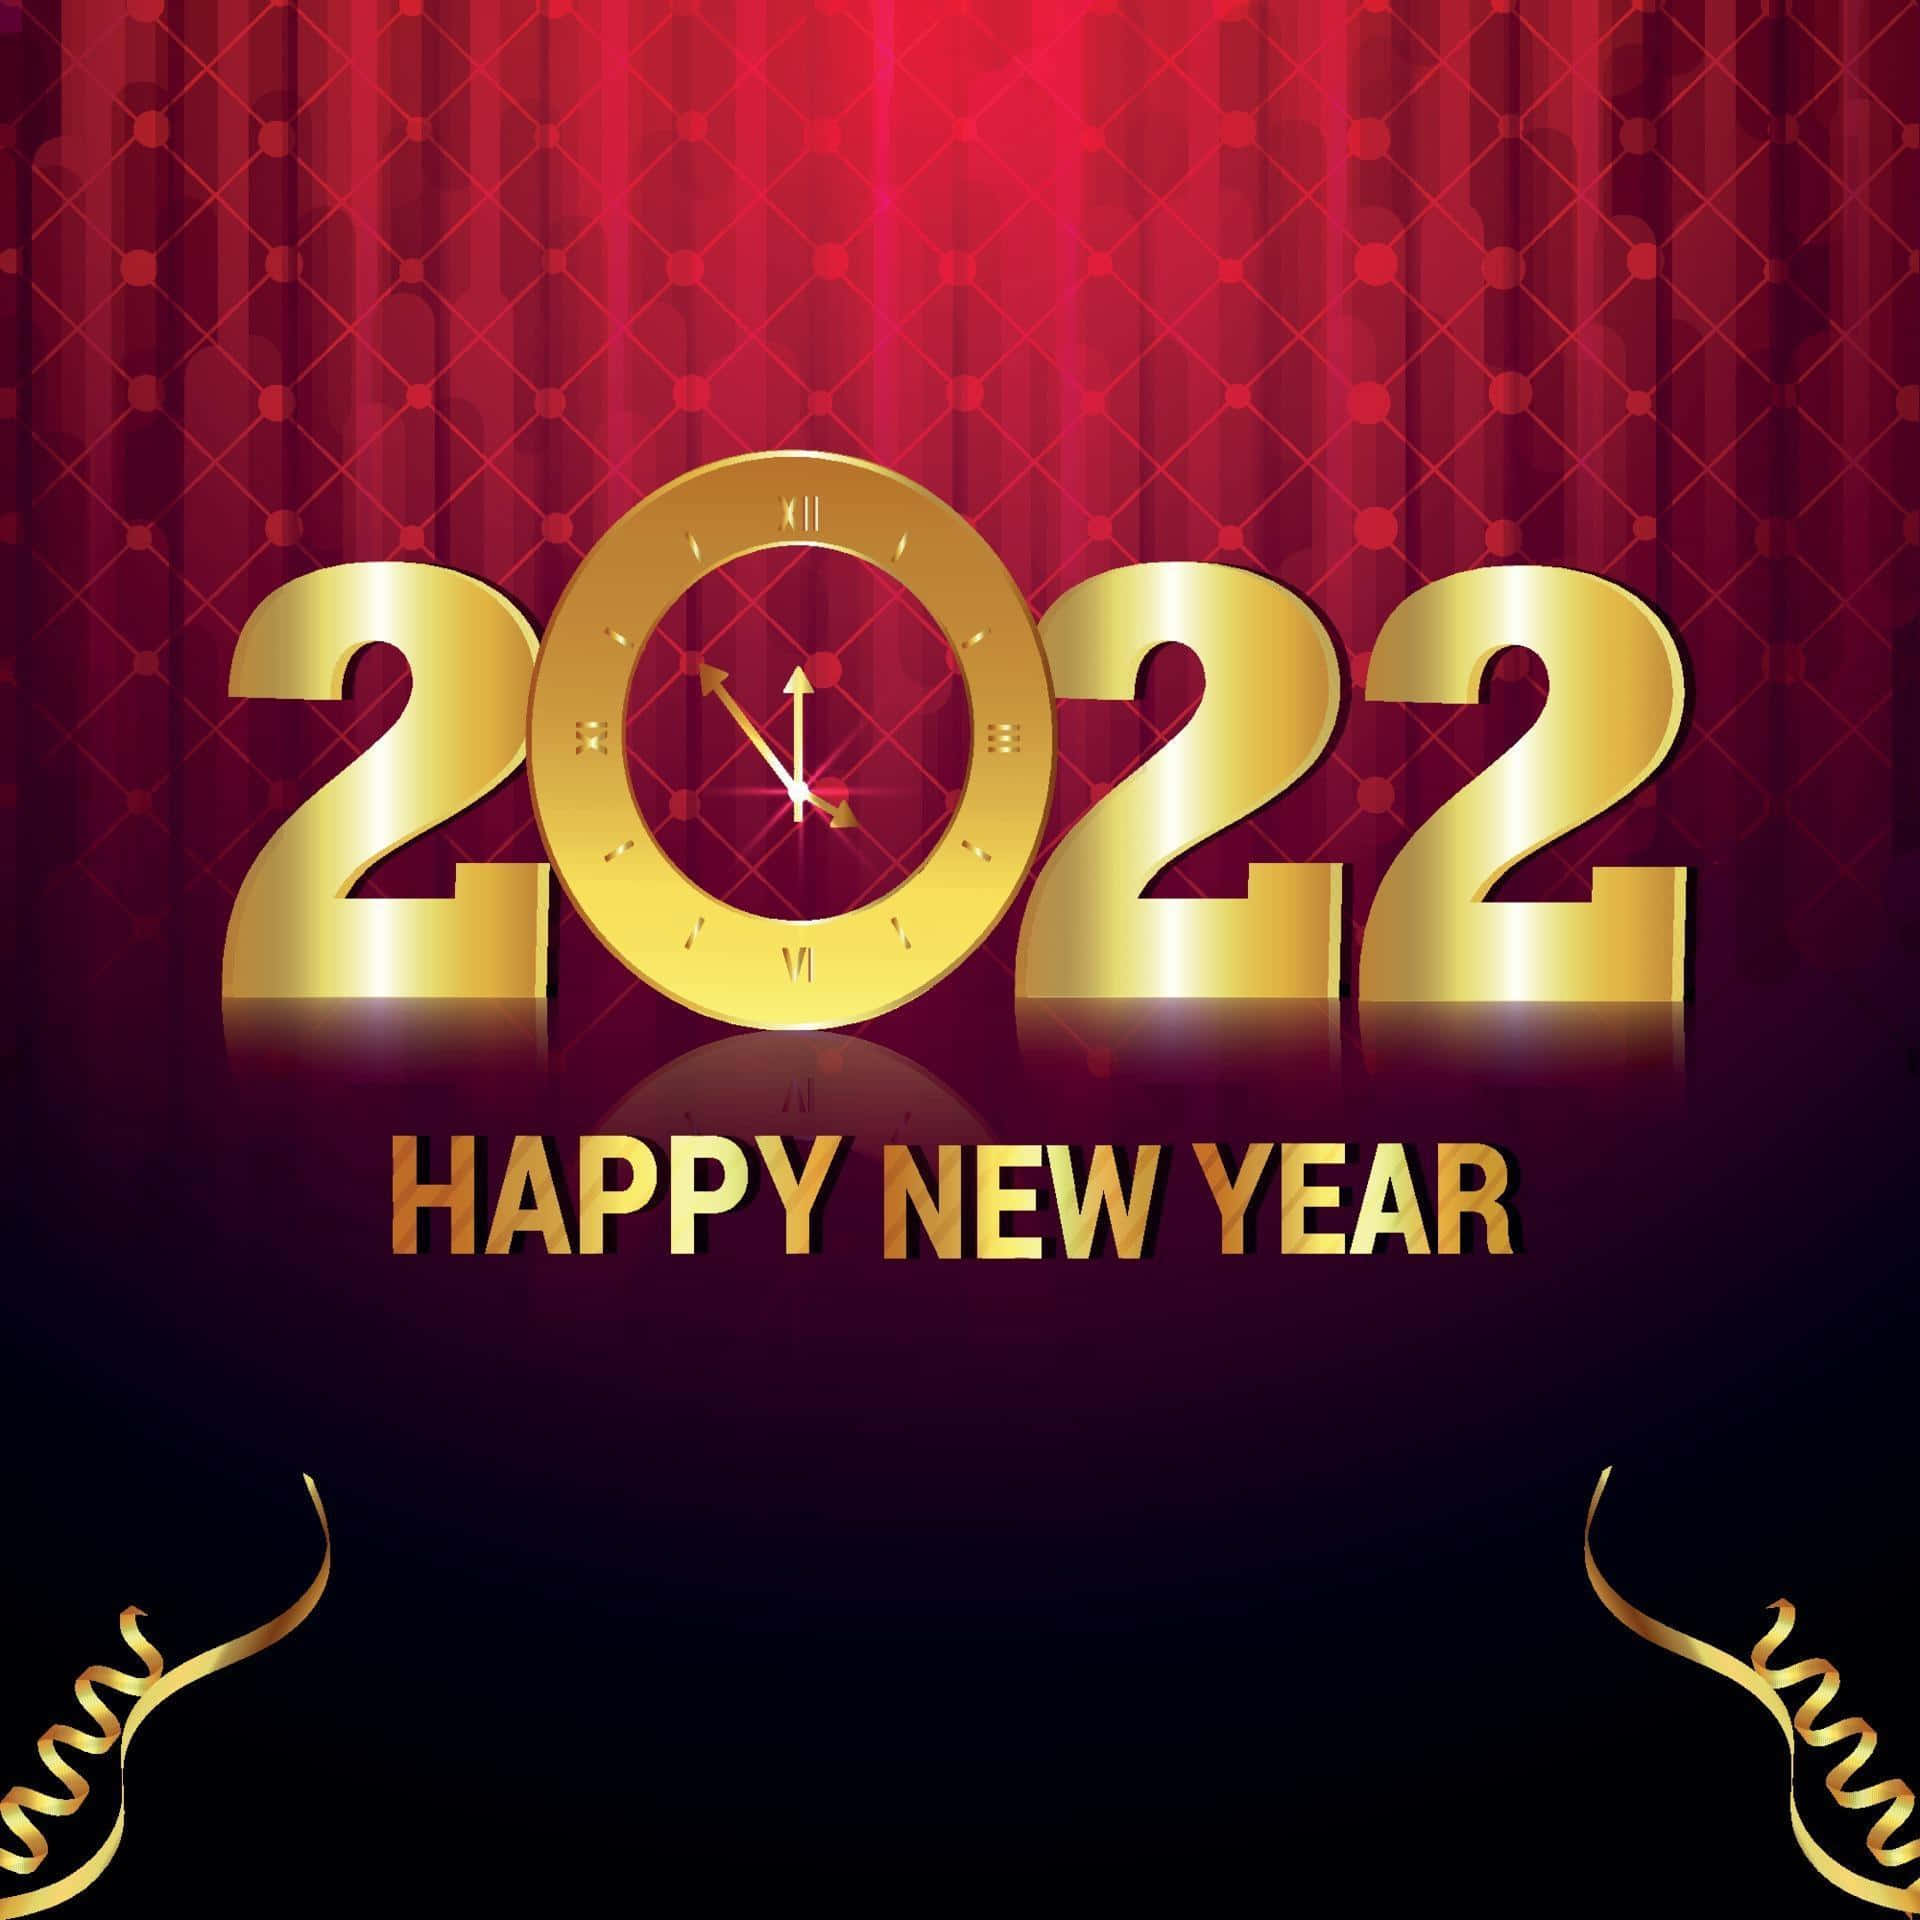 Happy New Year 2020 With Golden Clock And Red Background